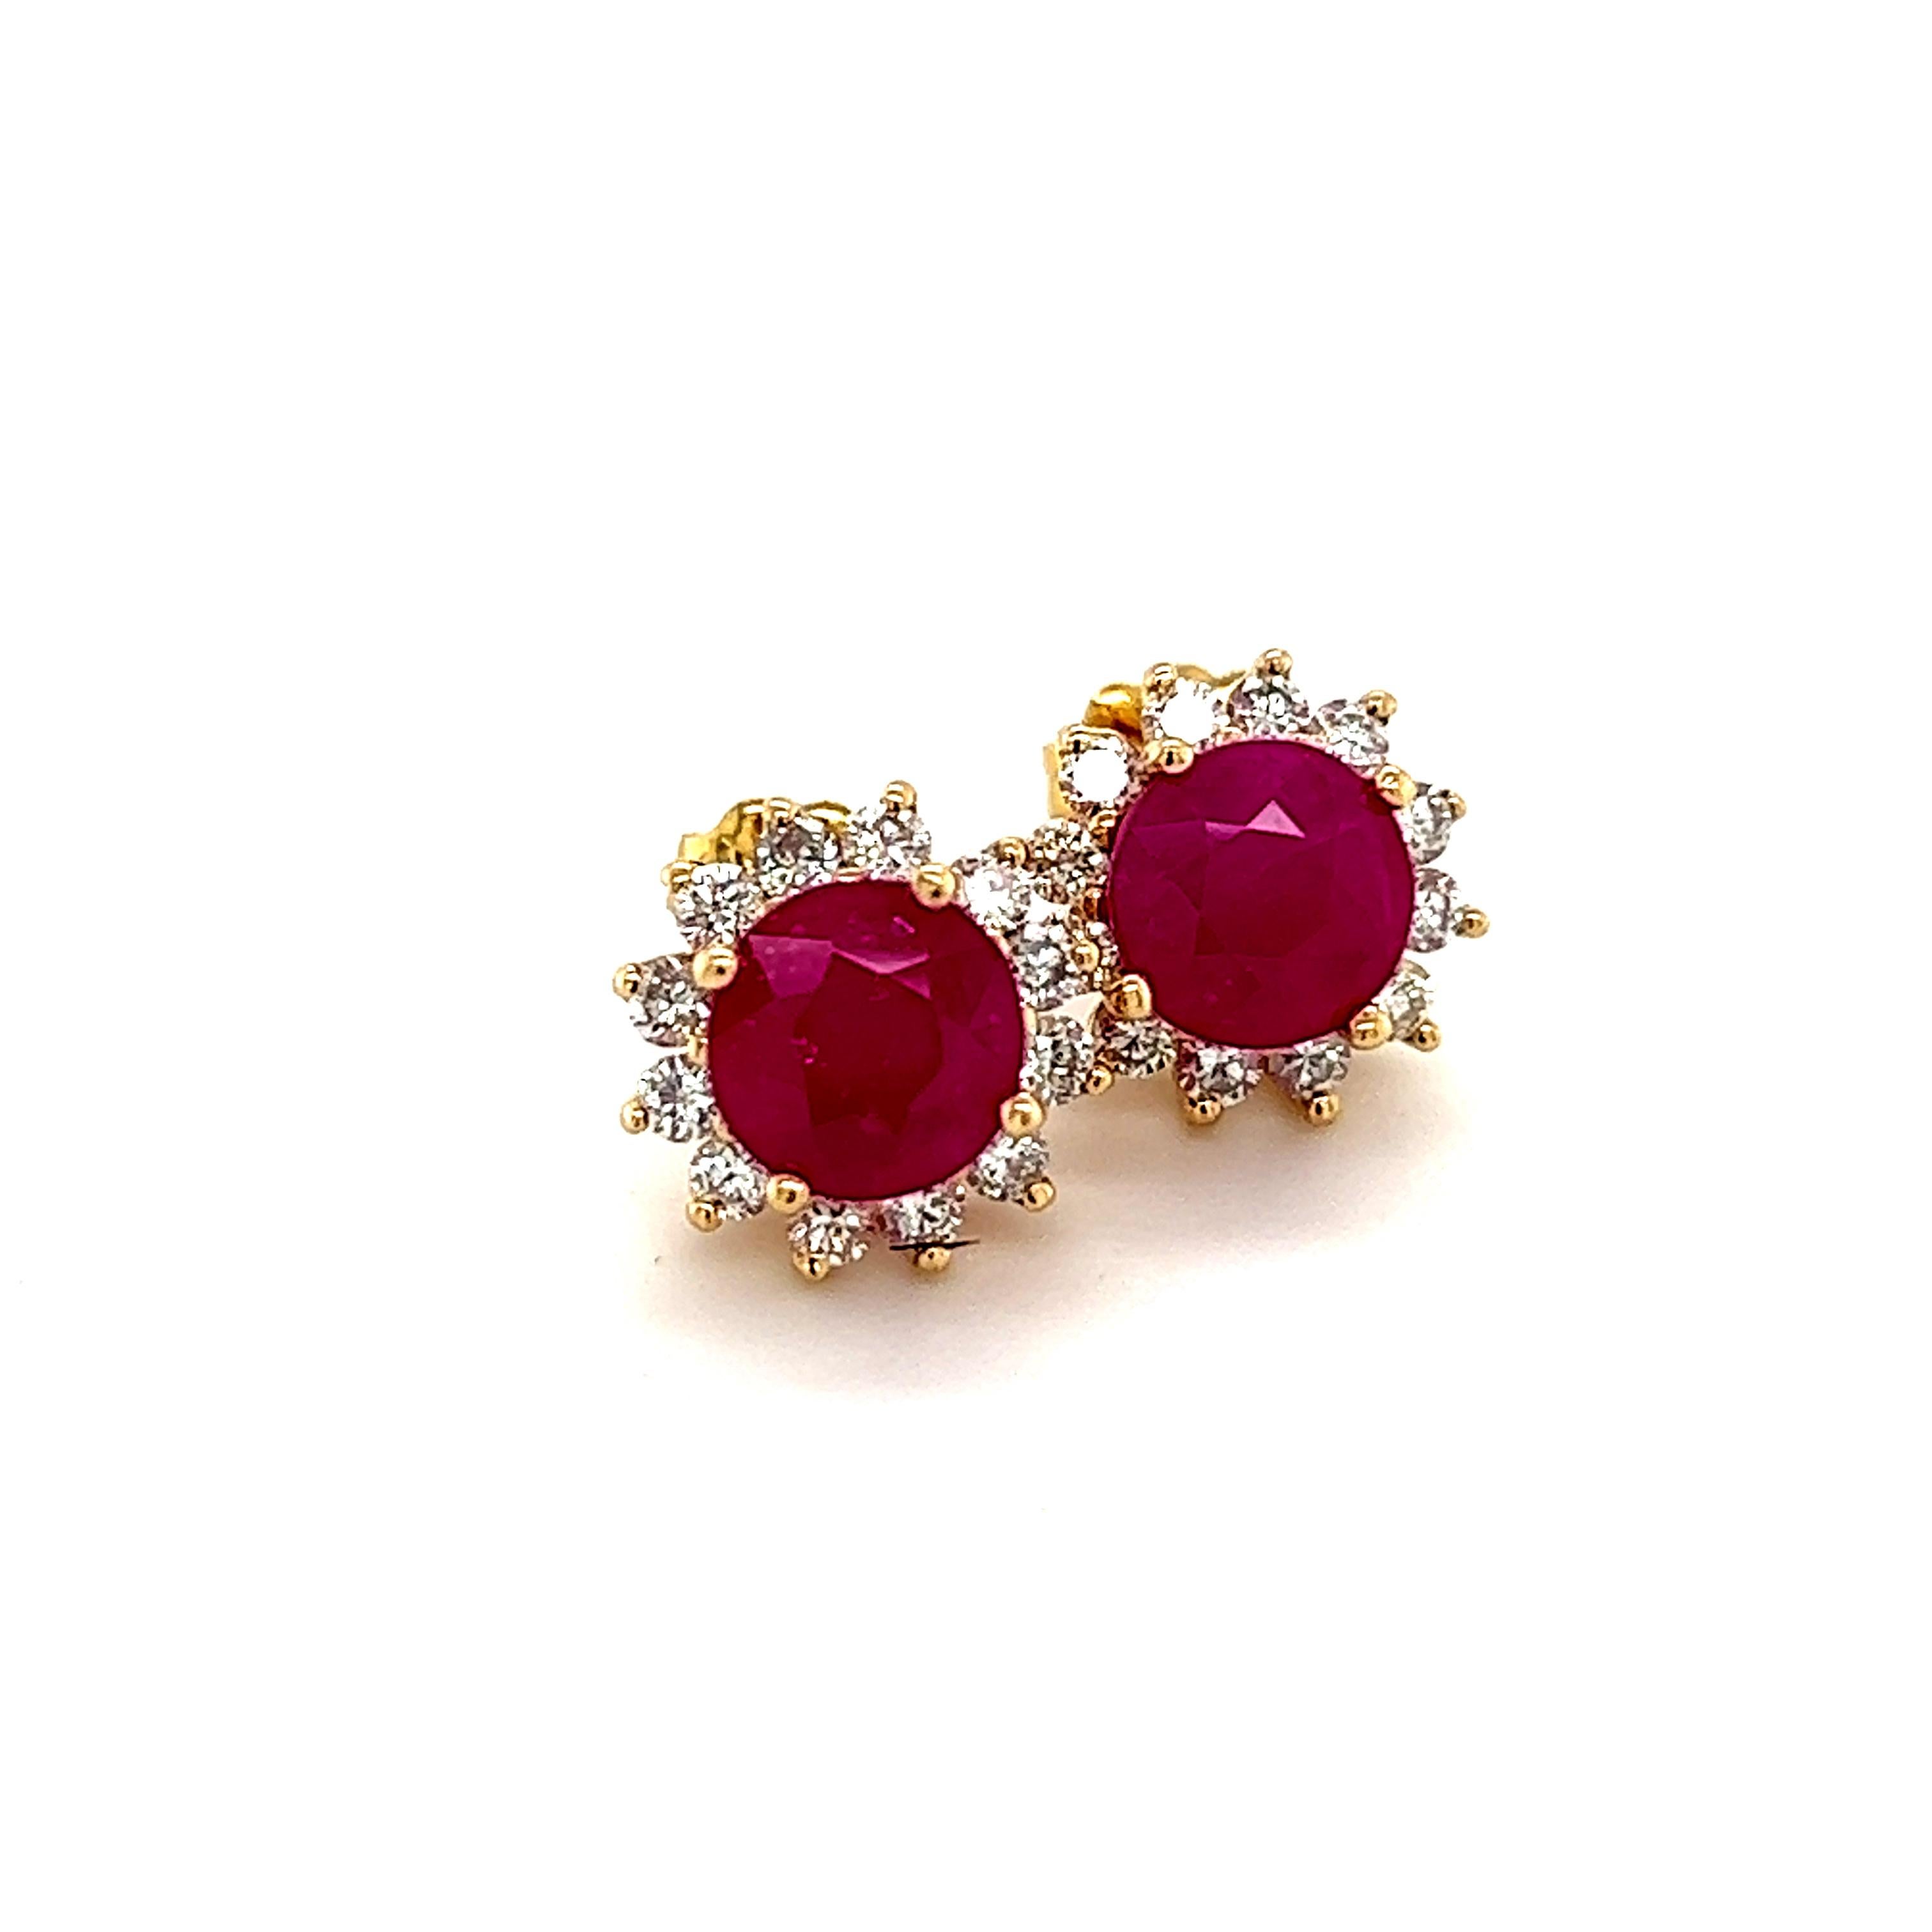 Natural Ruby Diamond Earrings 14k Gold 3.72 TCW Certified For Sale 4